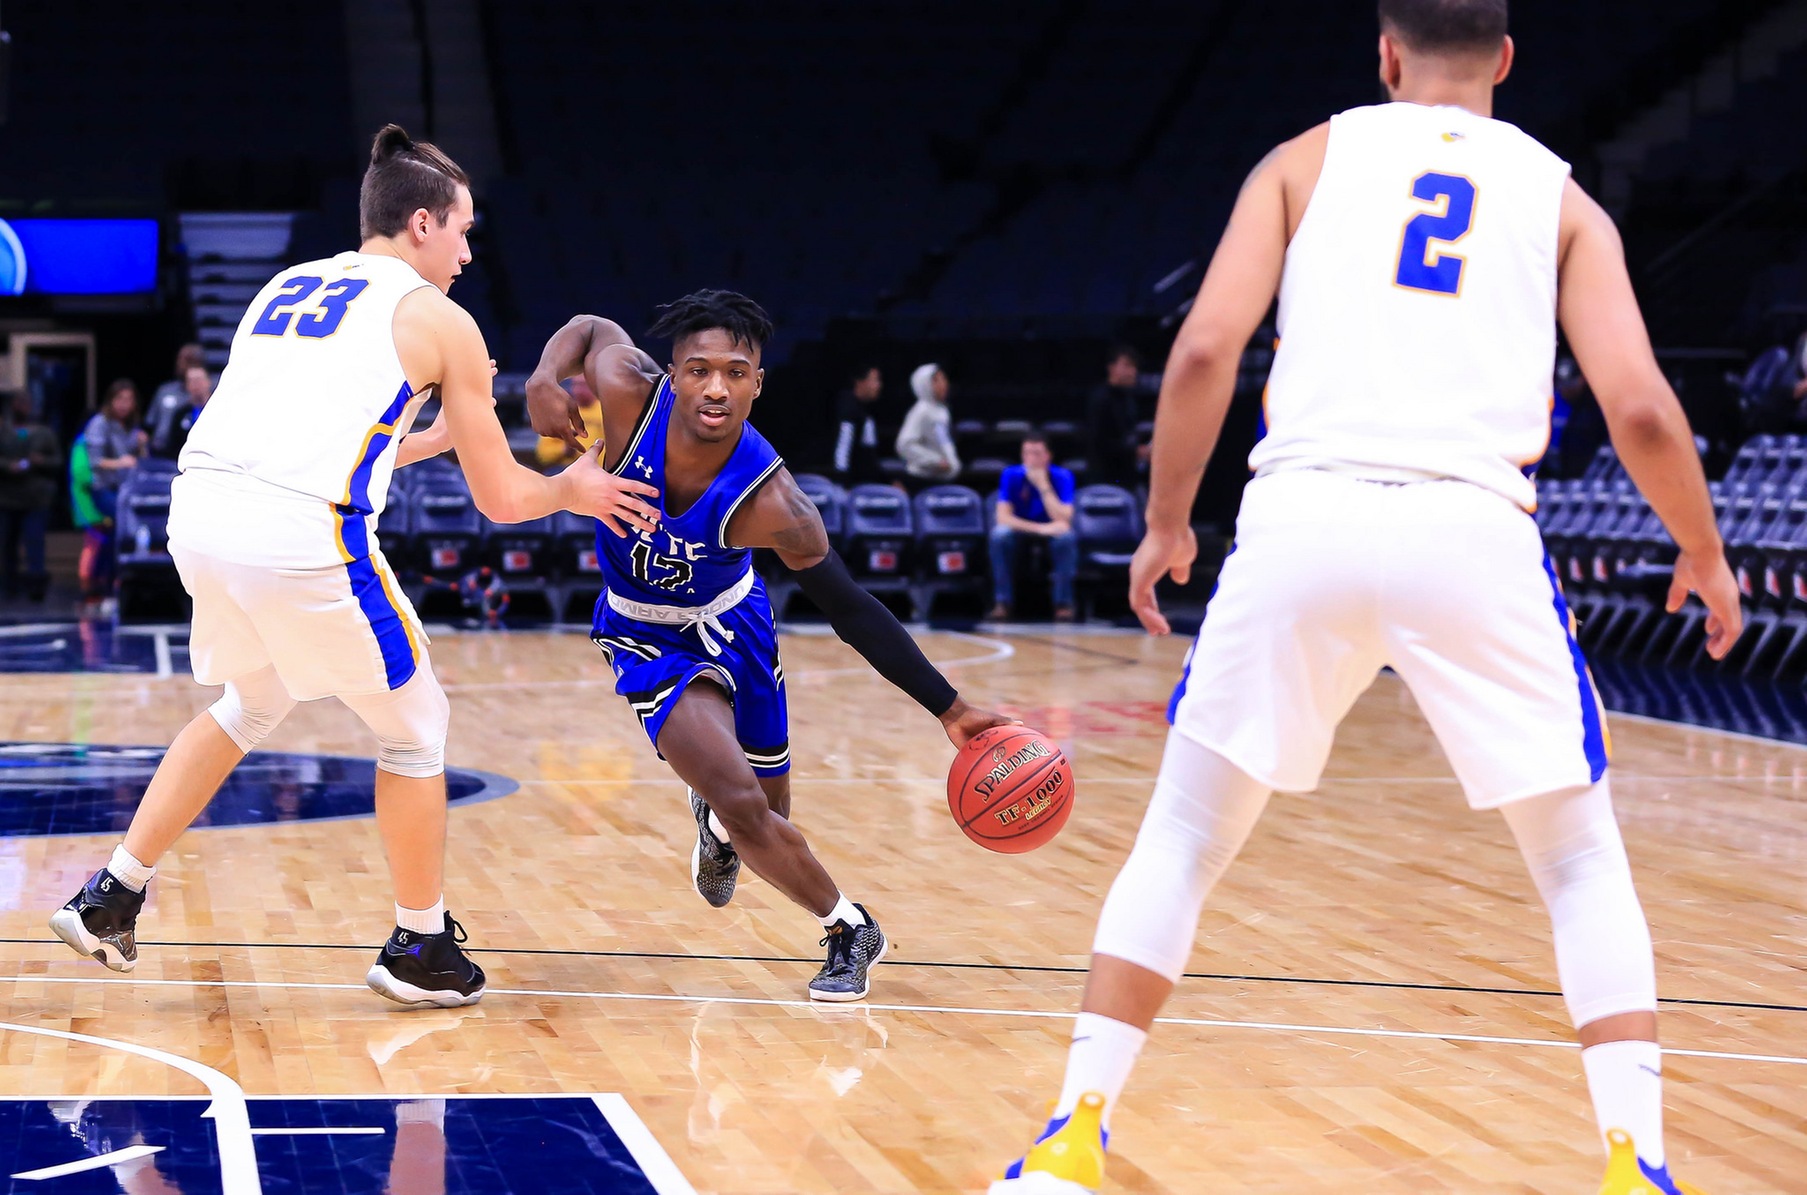 DCTC Falls to Bay College